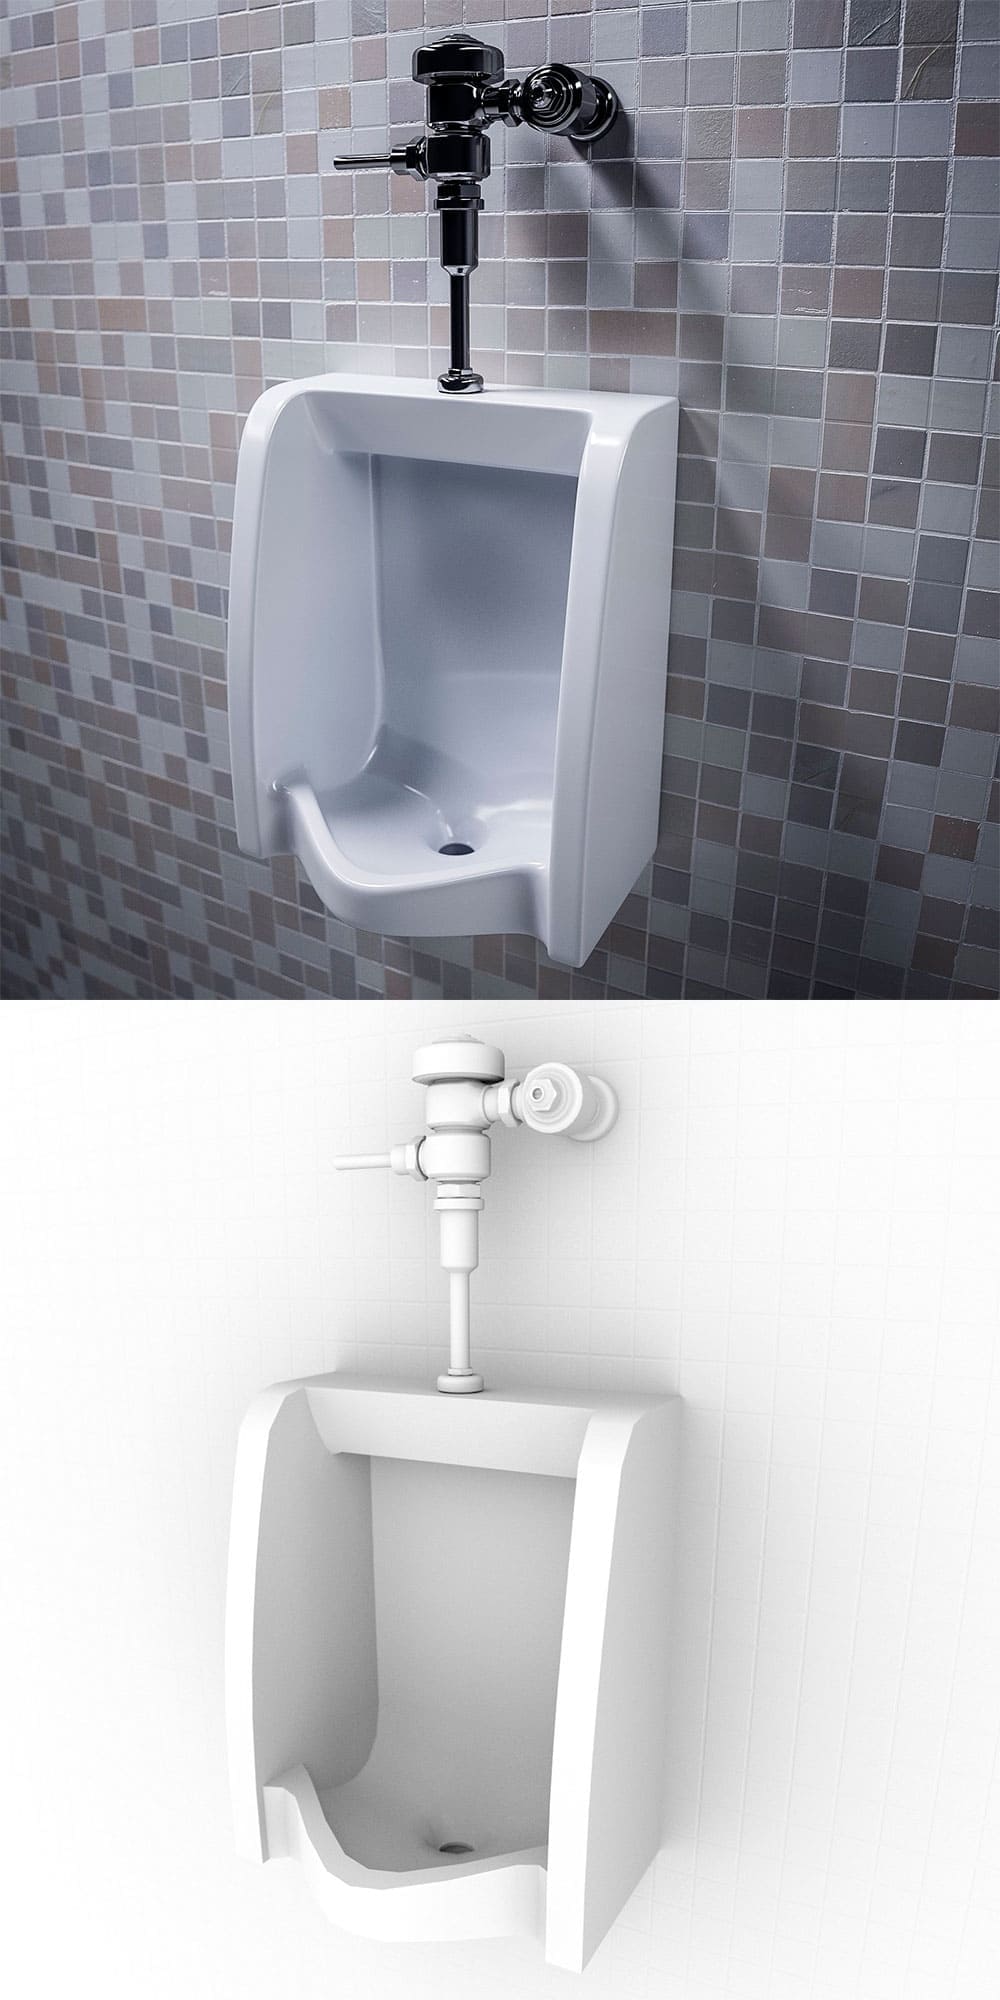 Urinal, picture for pinterest.